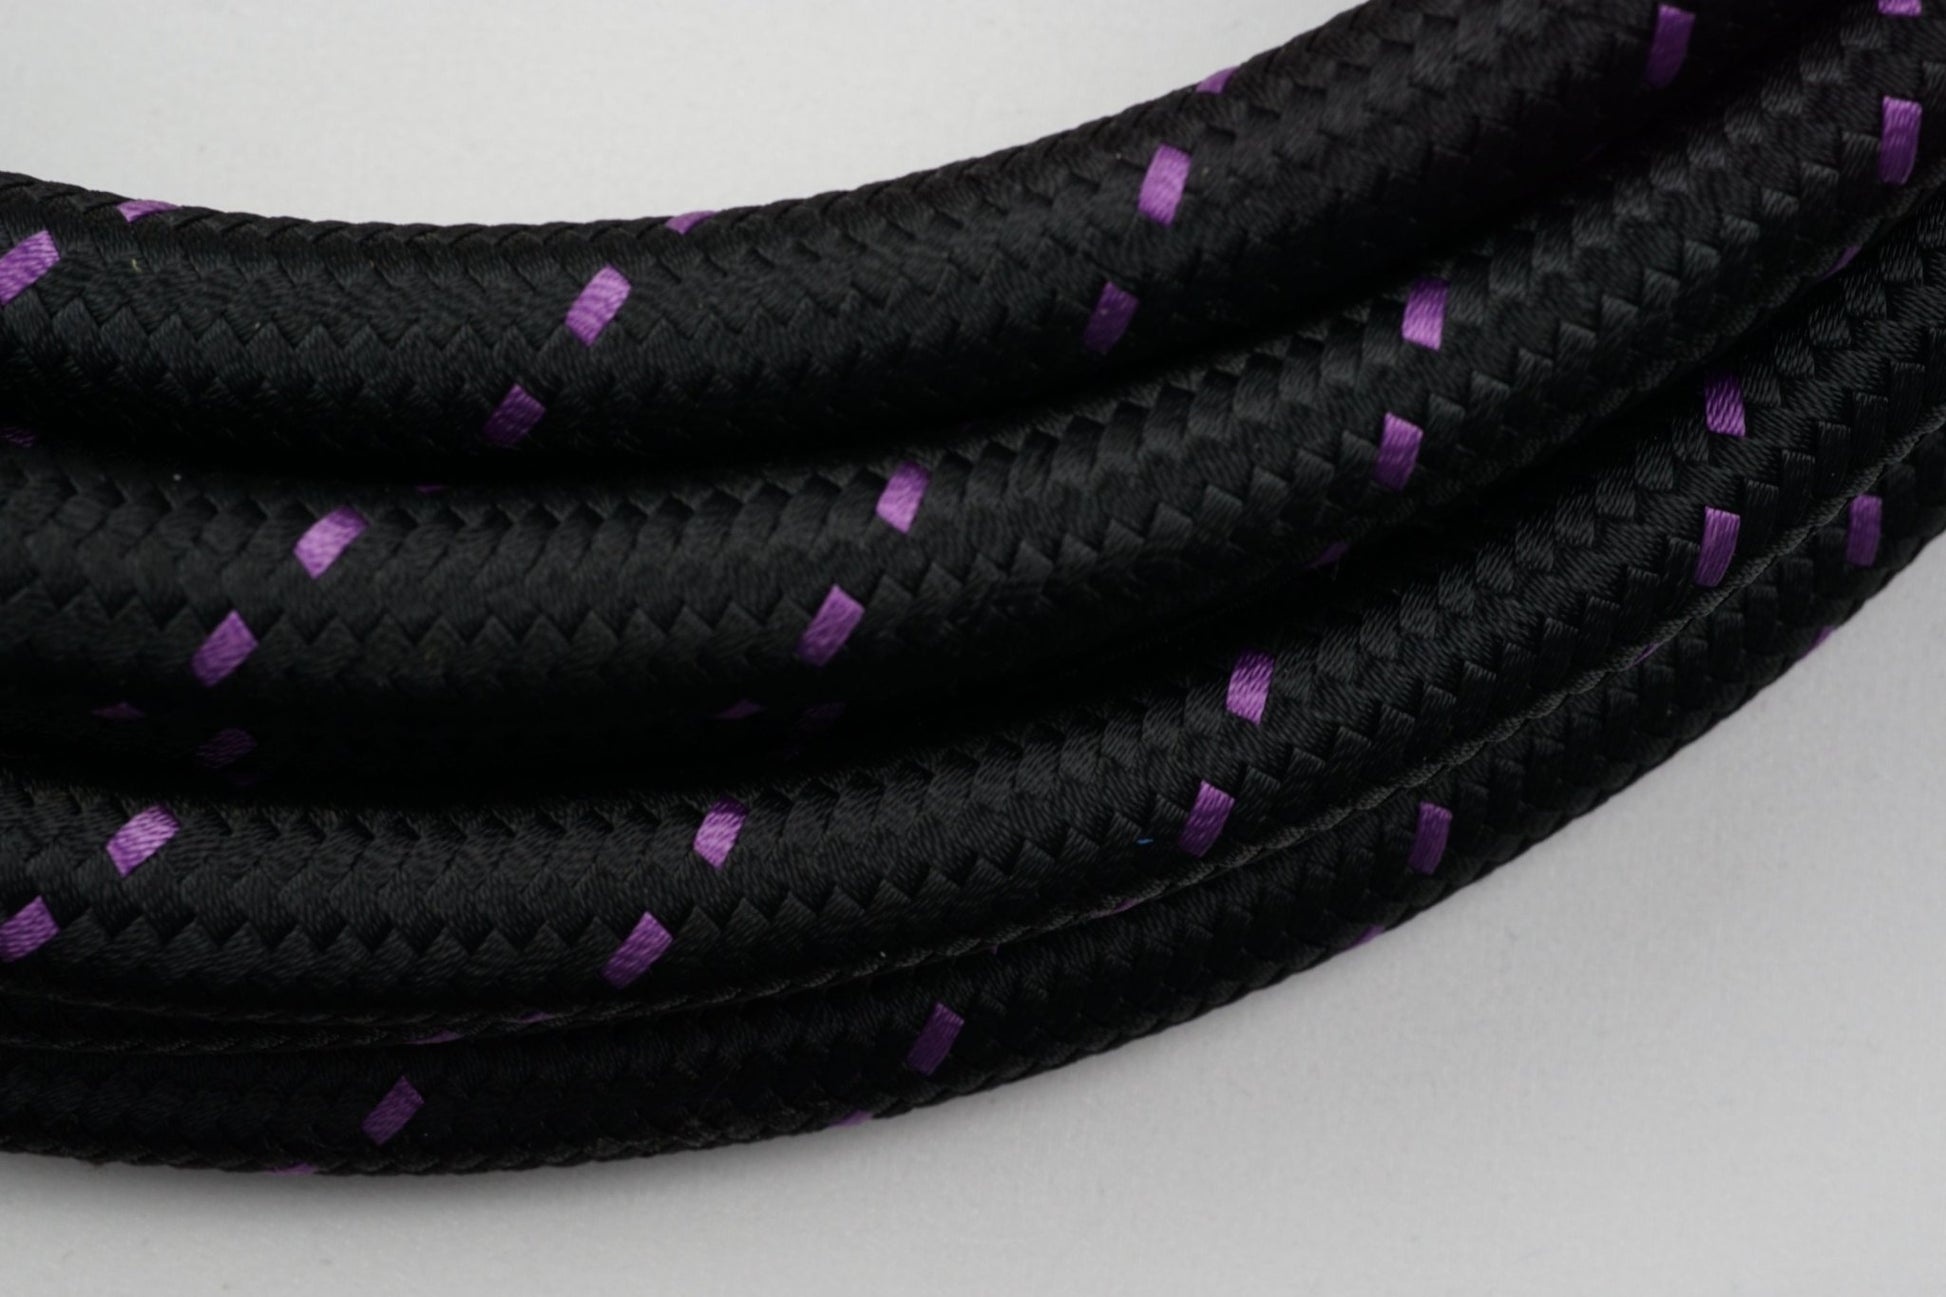 PTFE lined Black Nylon with Purple Checks braided hose - AN6, AN8 - Hot Rod fuel hose by One Guy Garage